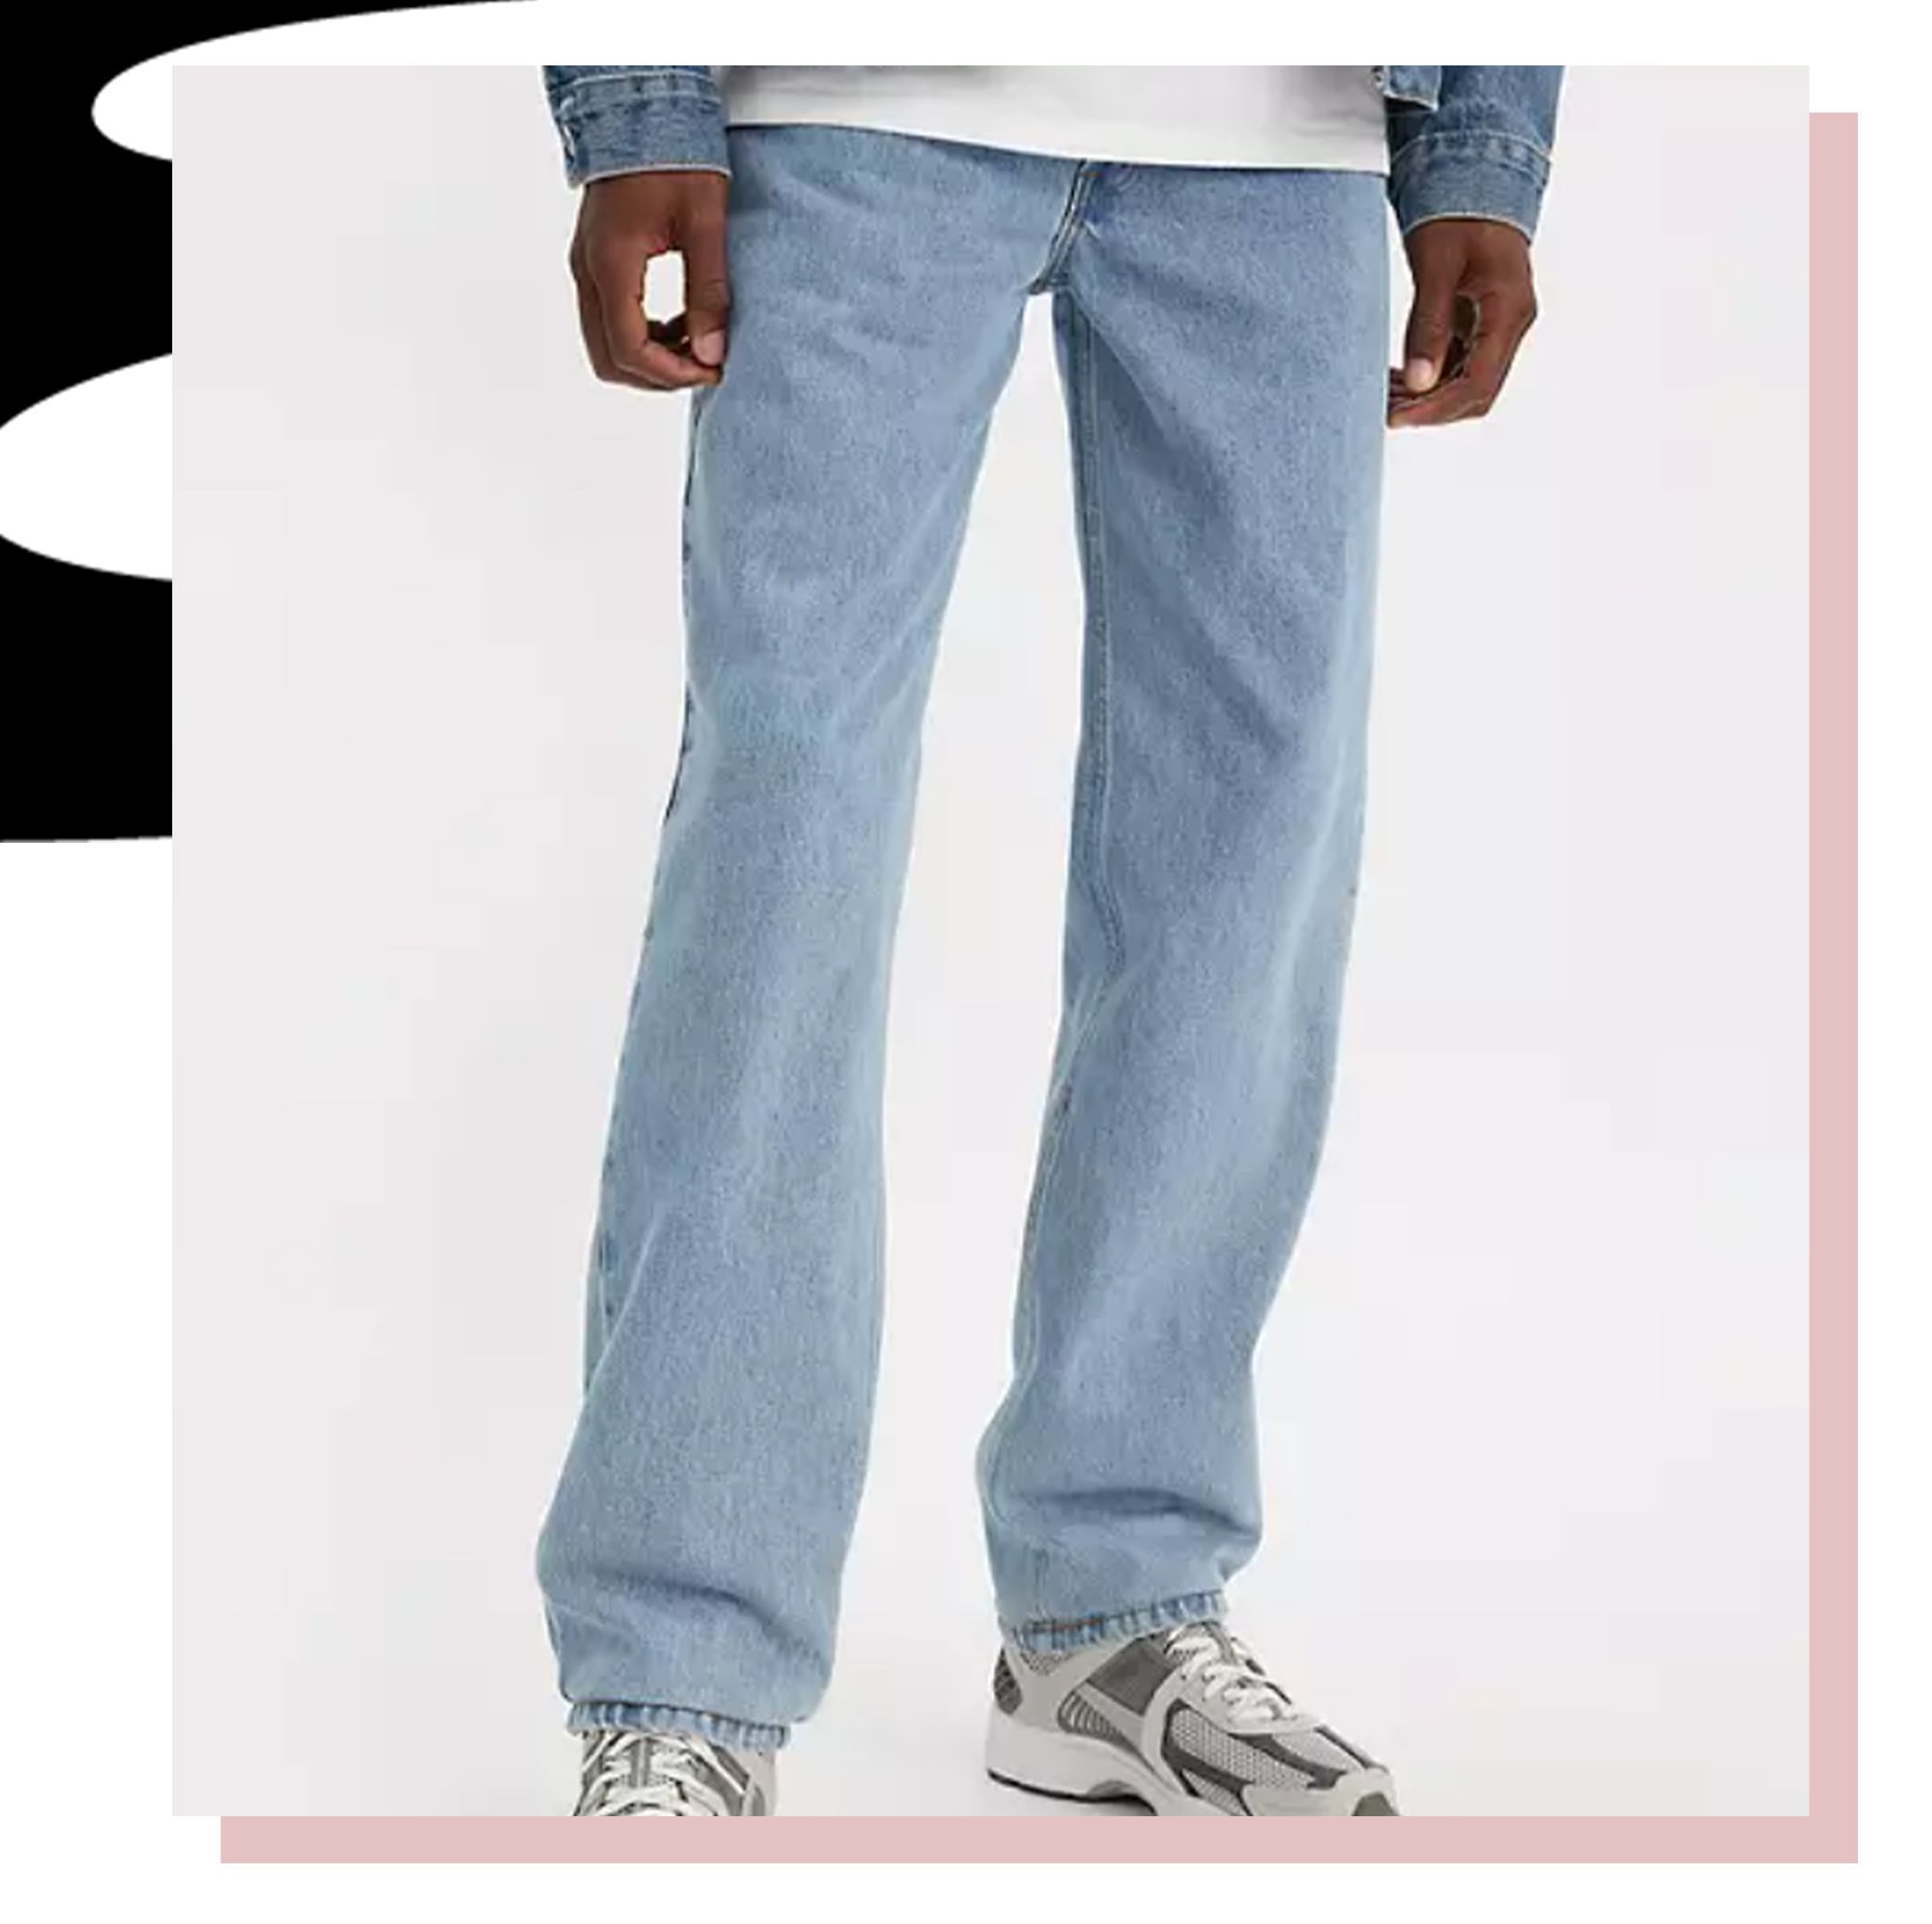 An Official Levi's Jeans Buying Guide: The Best Cuts, Washes, and How to Buy